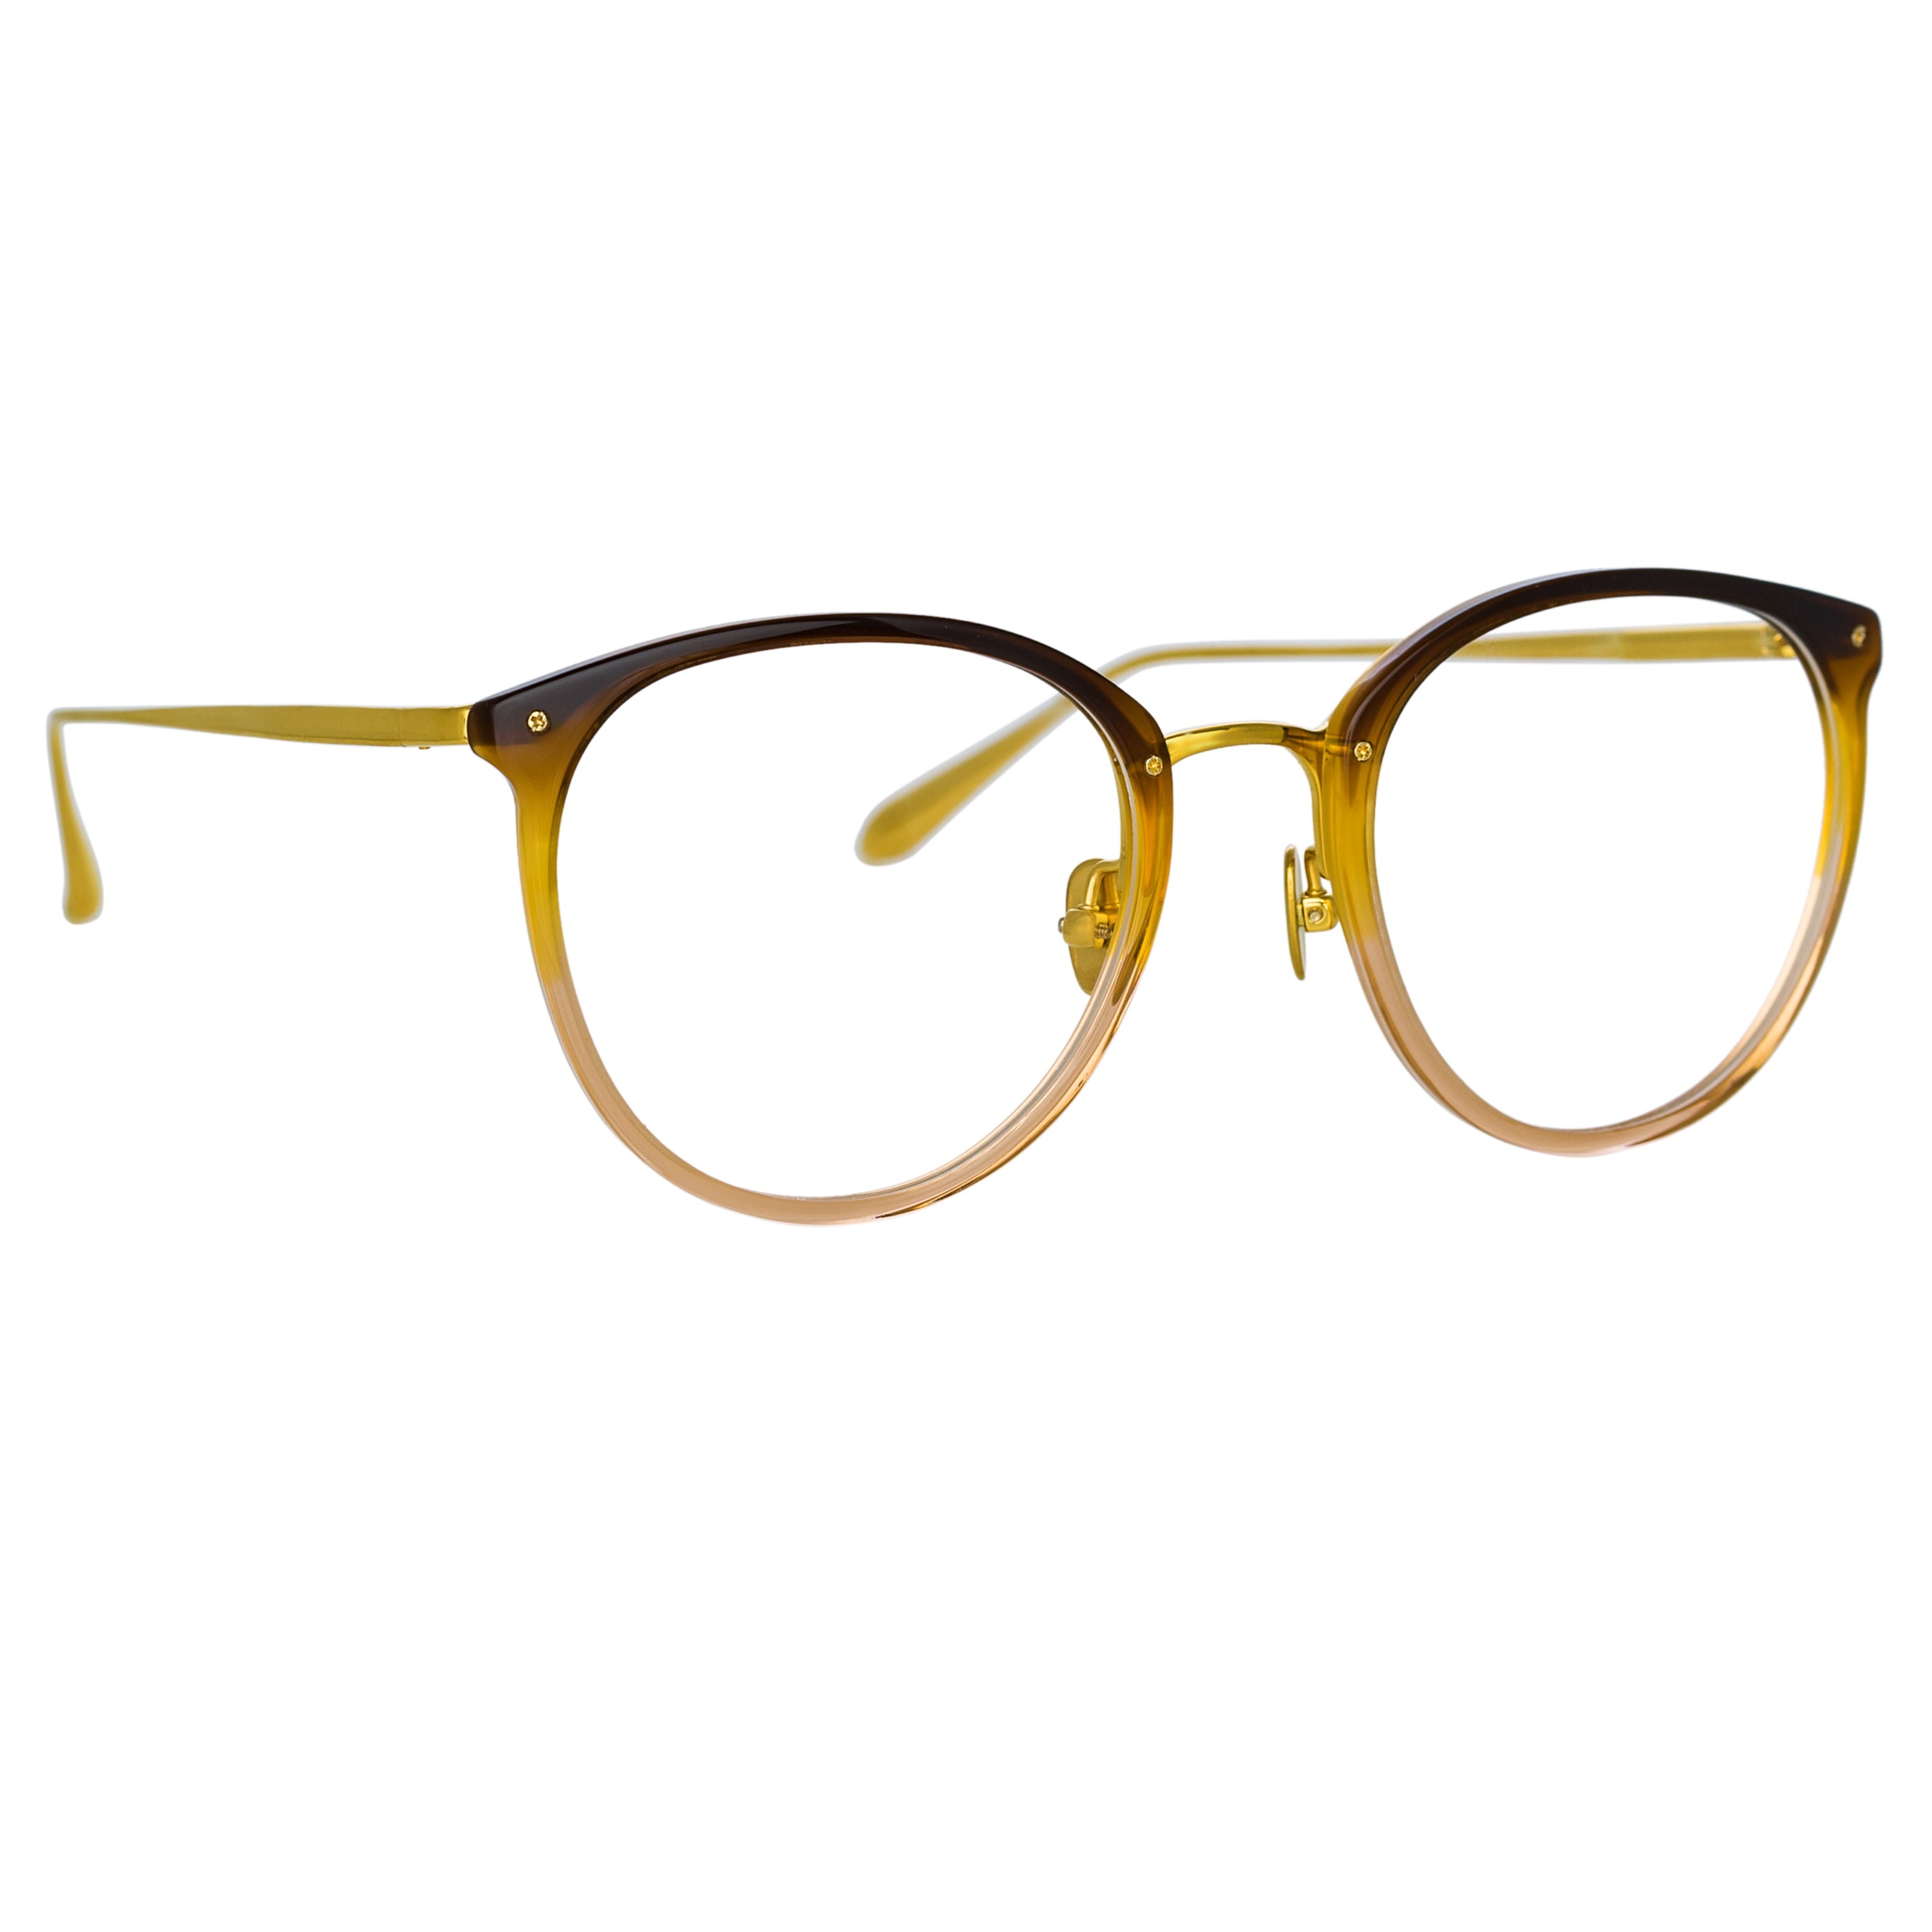 CALTHORPE OVAL OPTICAL FRAME IN BROWN GRADIENT - 2